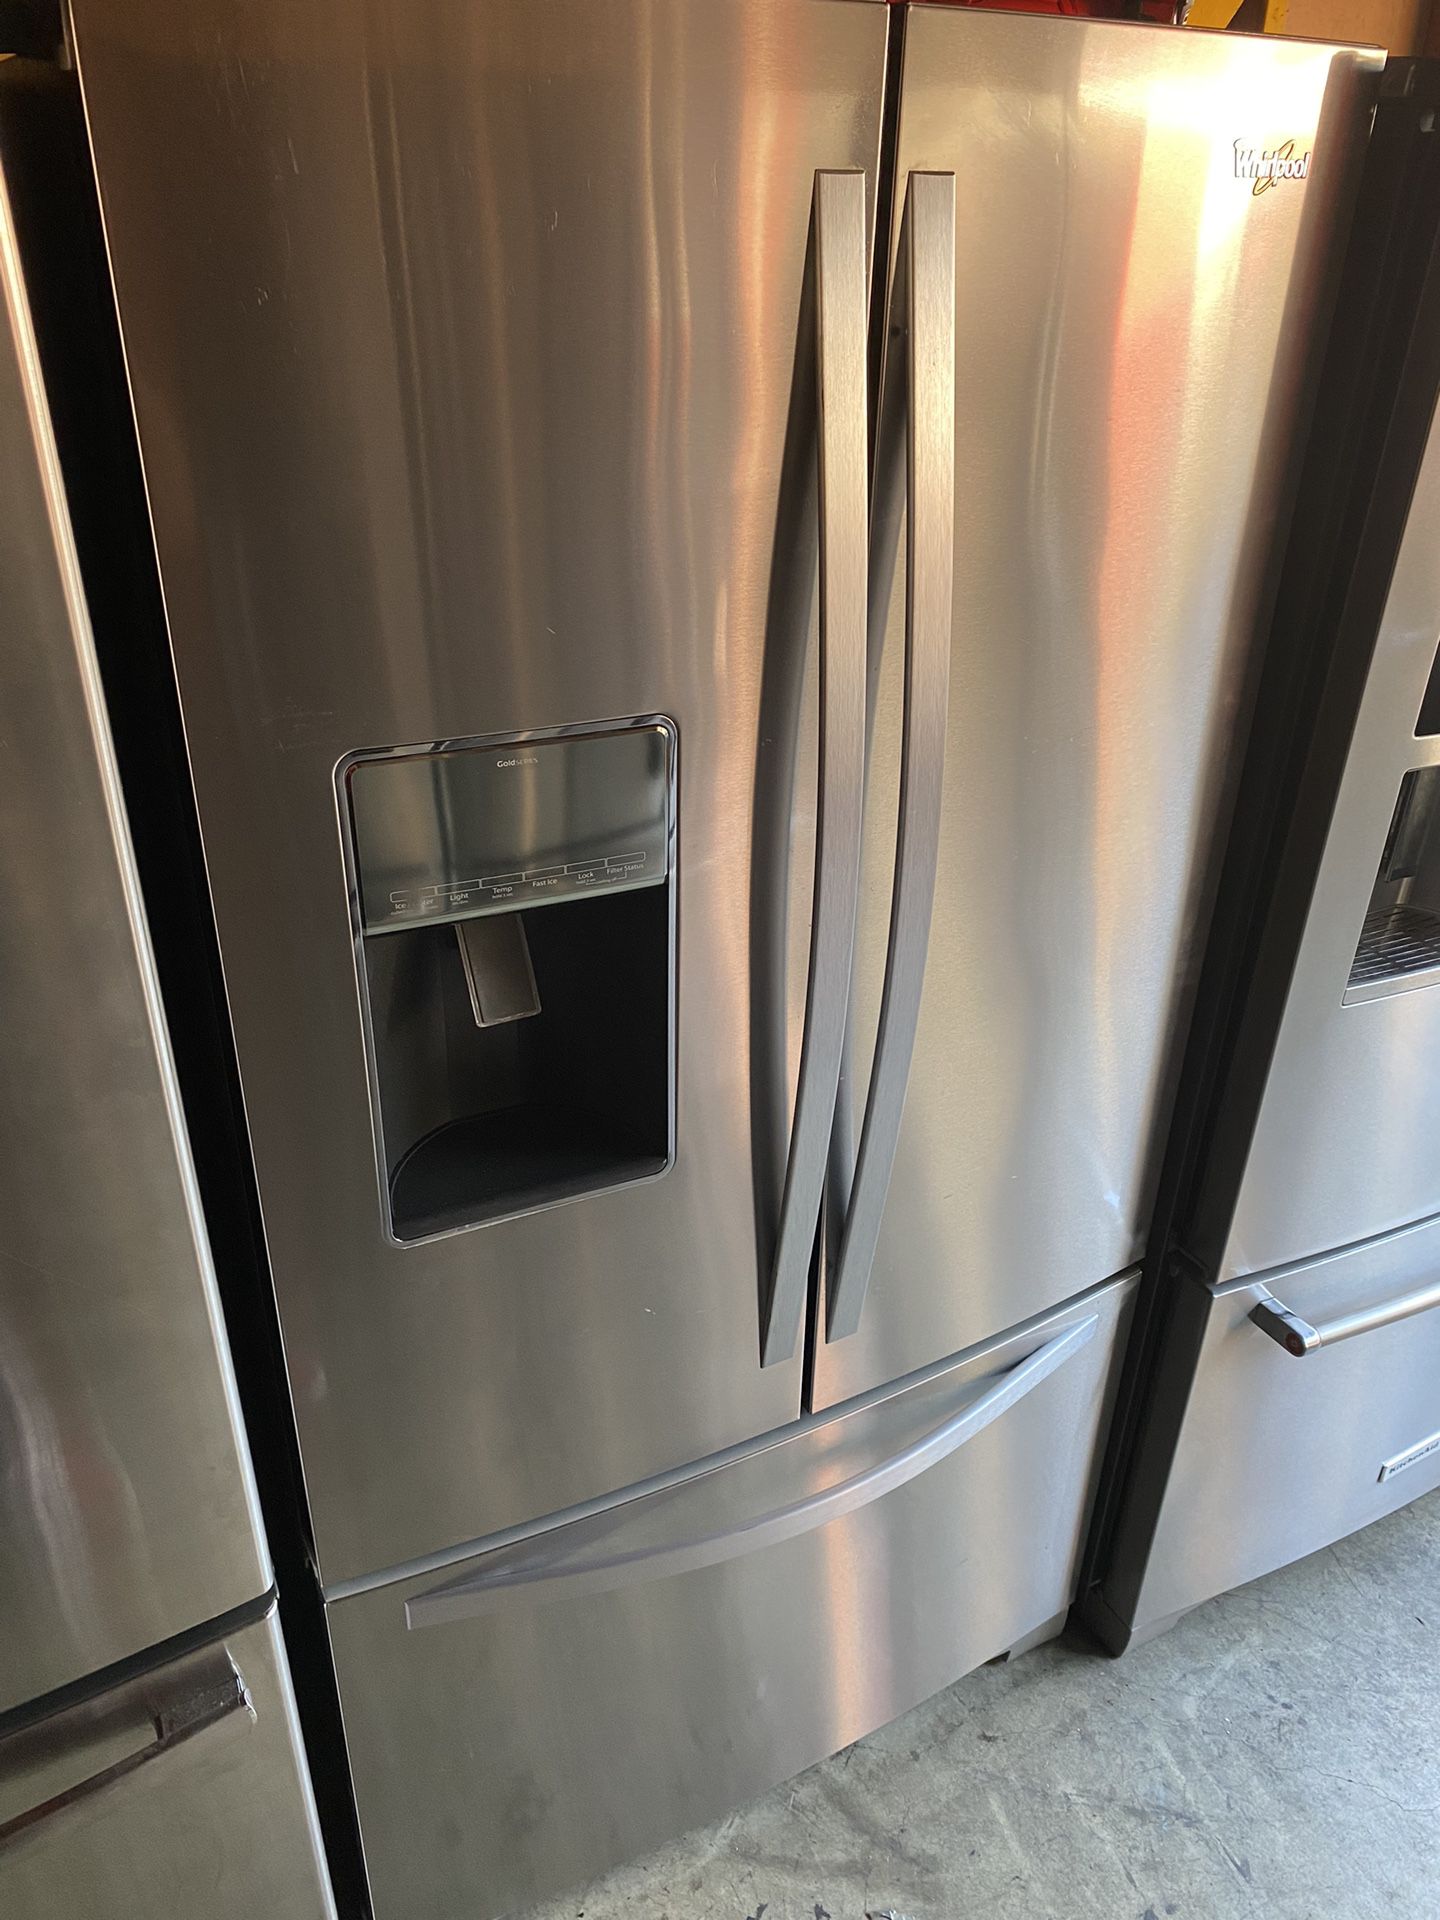 Whirlpool French Doors Stainless Steel Refrigerator 